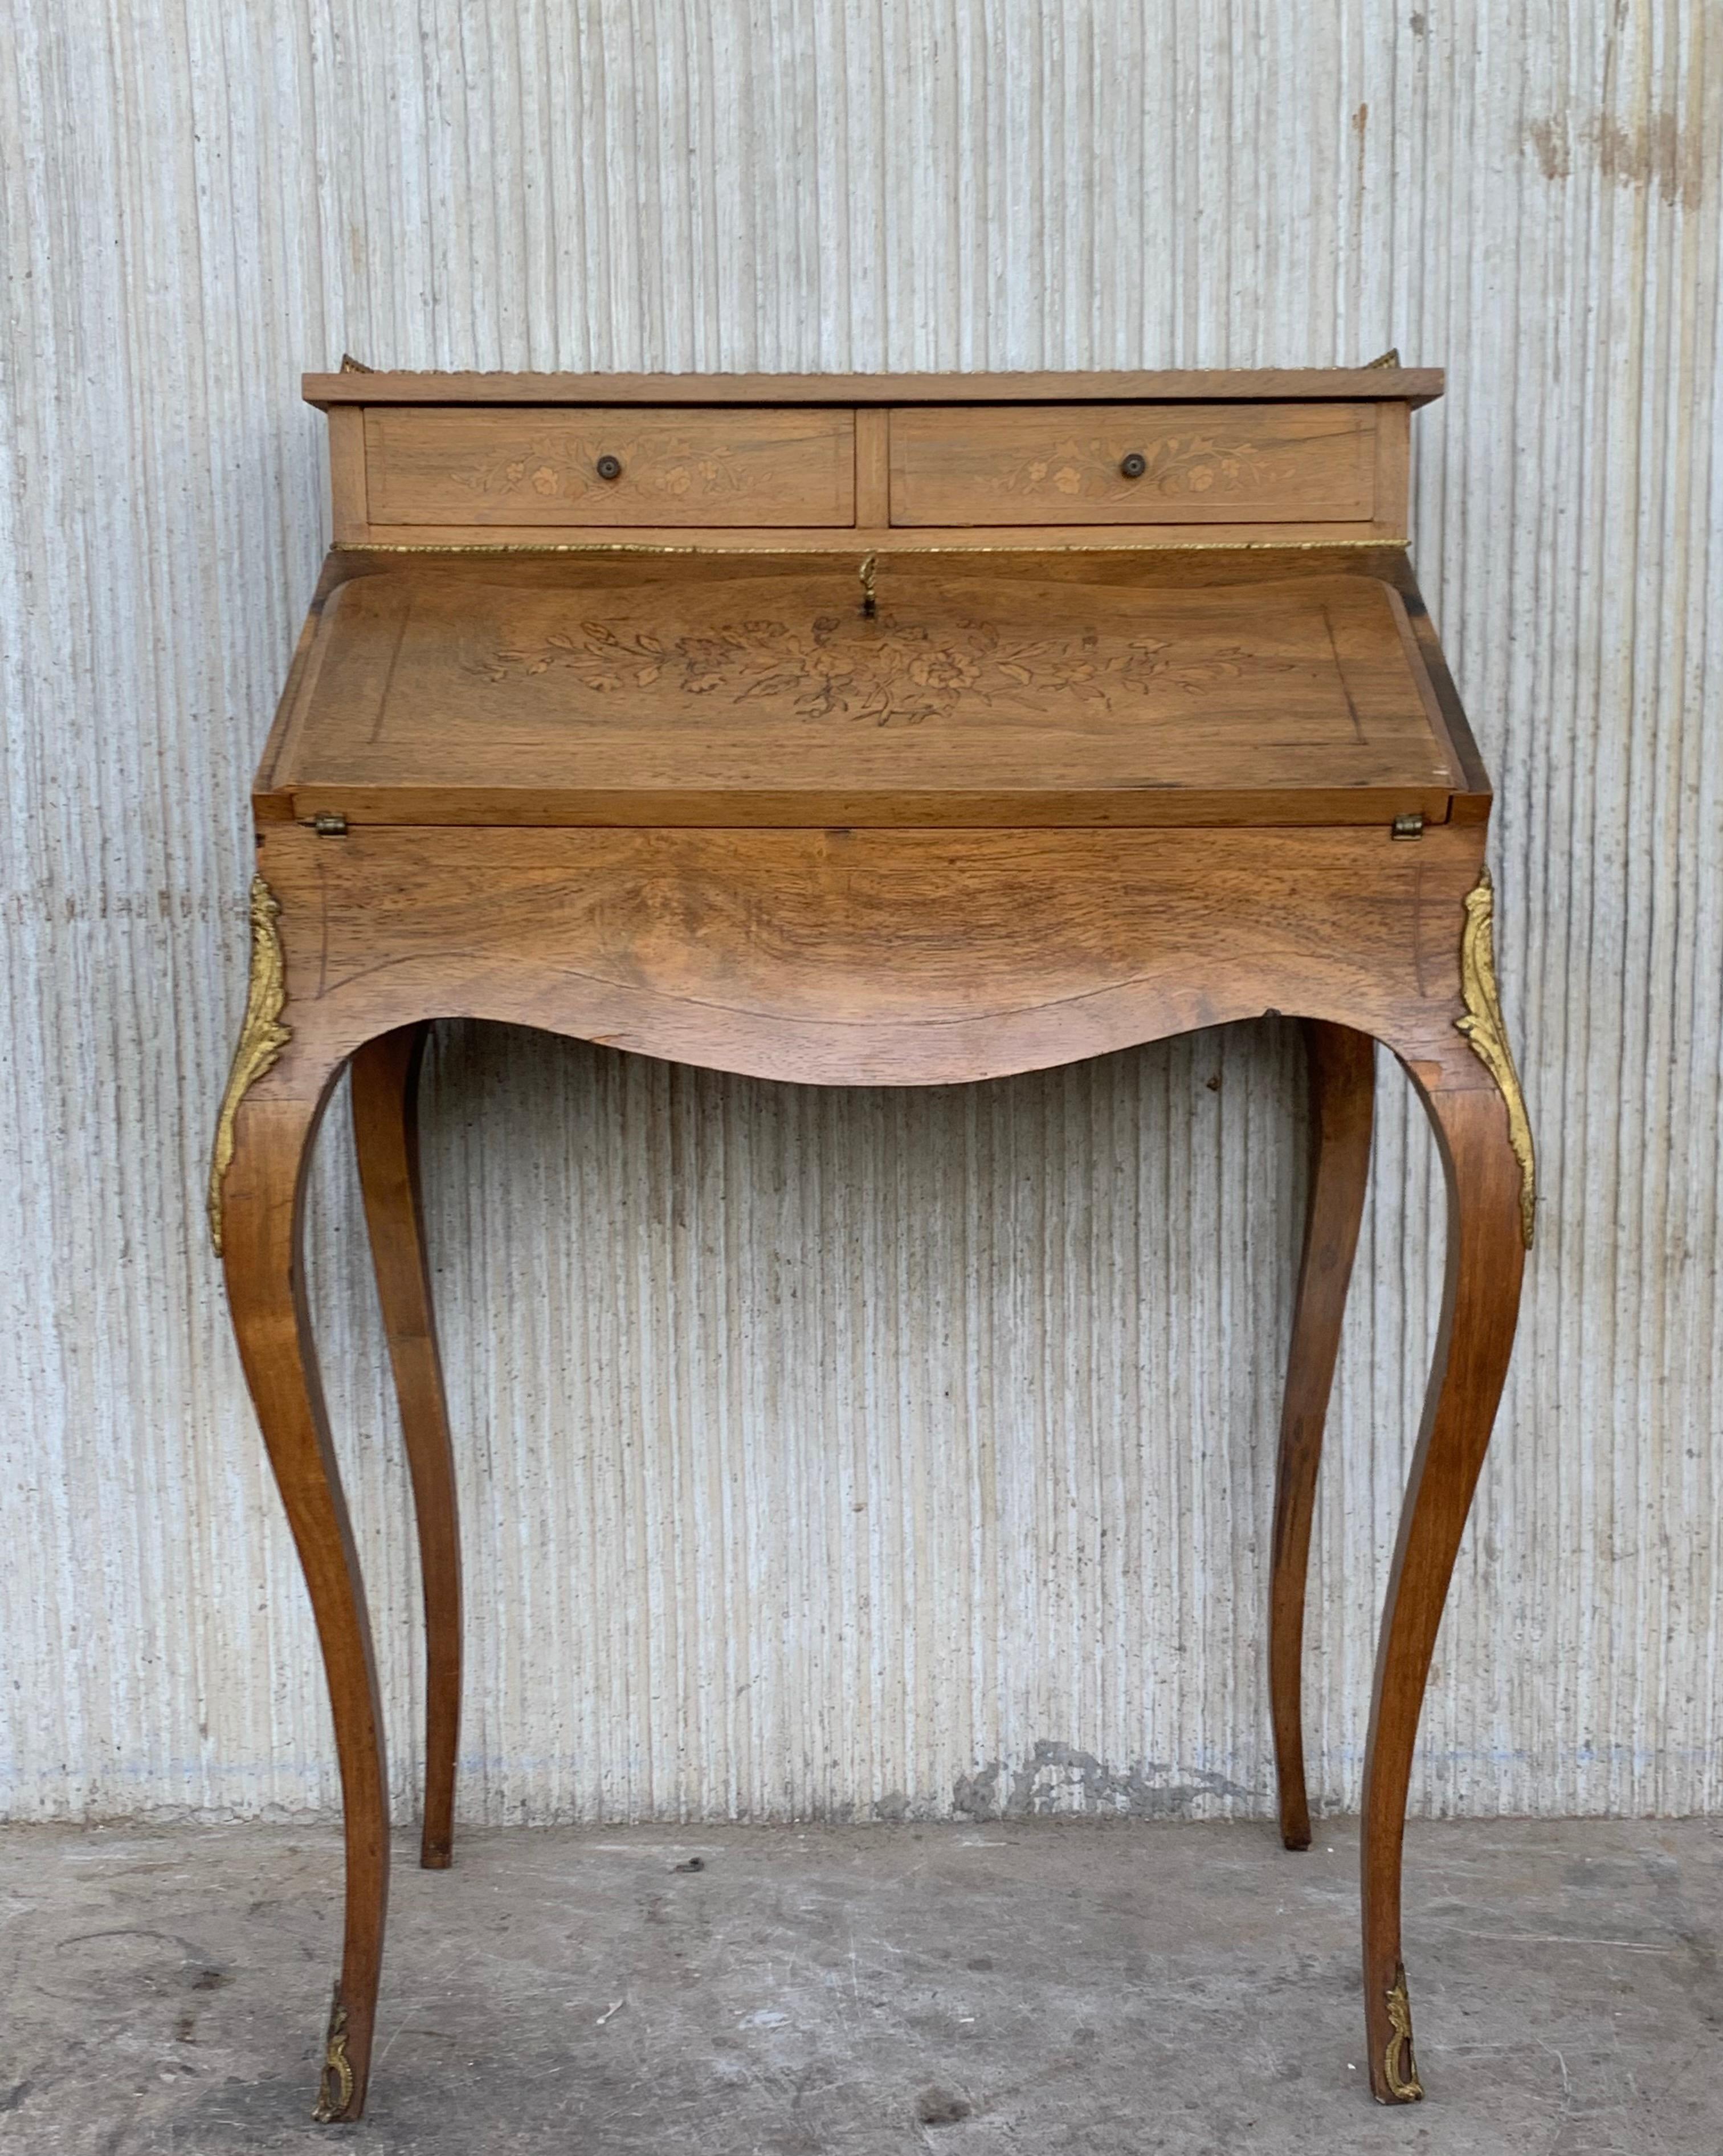 Louis XV style folding desk with one drawer. An exceptional Louis XV style desk, made of early Italian antique oak wood.
This piece screams high quality. Beautiful grain and patina. Spider legs, elegant shields / pulls with two drawers and